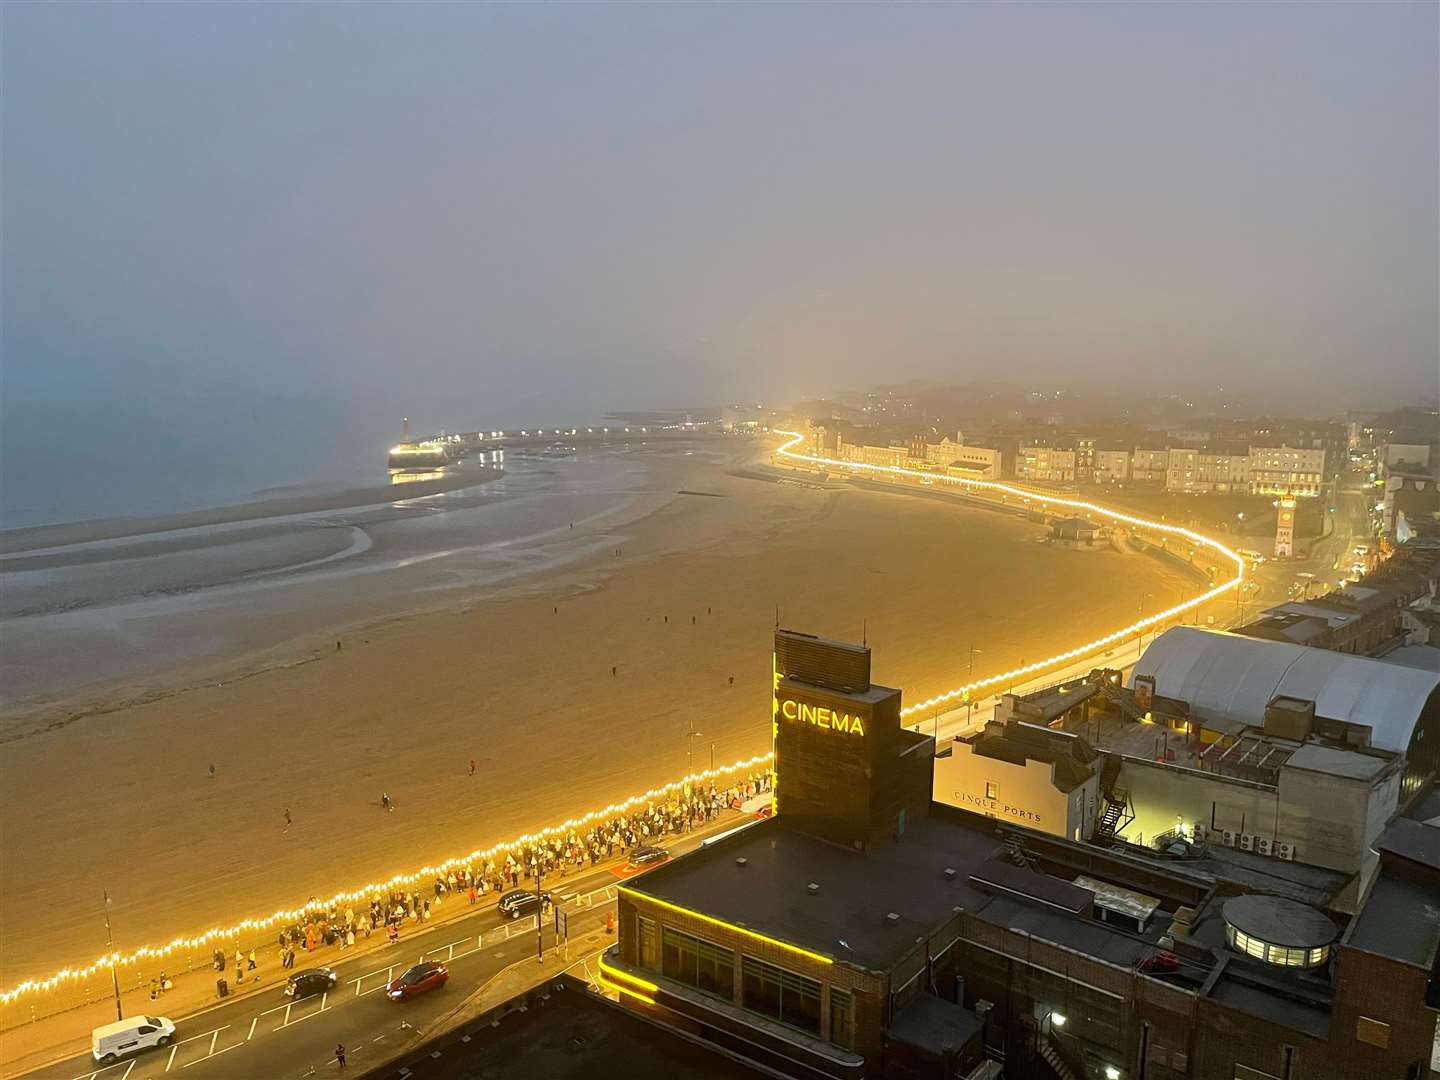 Margate's seafront was decorated with festoon lights for Empire of Light filming. Picture: Paul Johnson